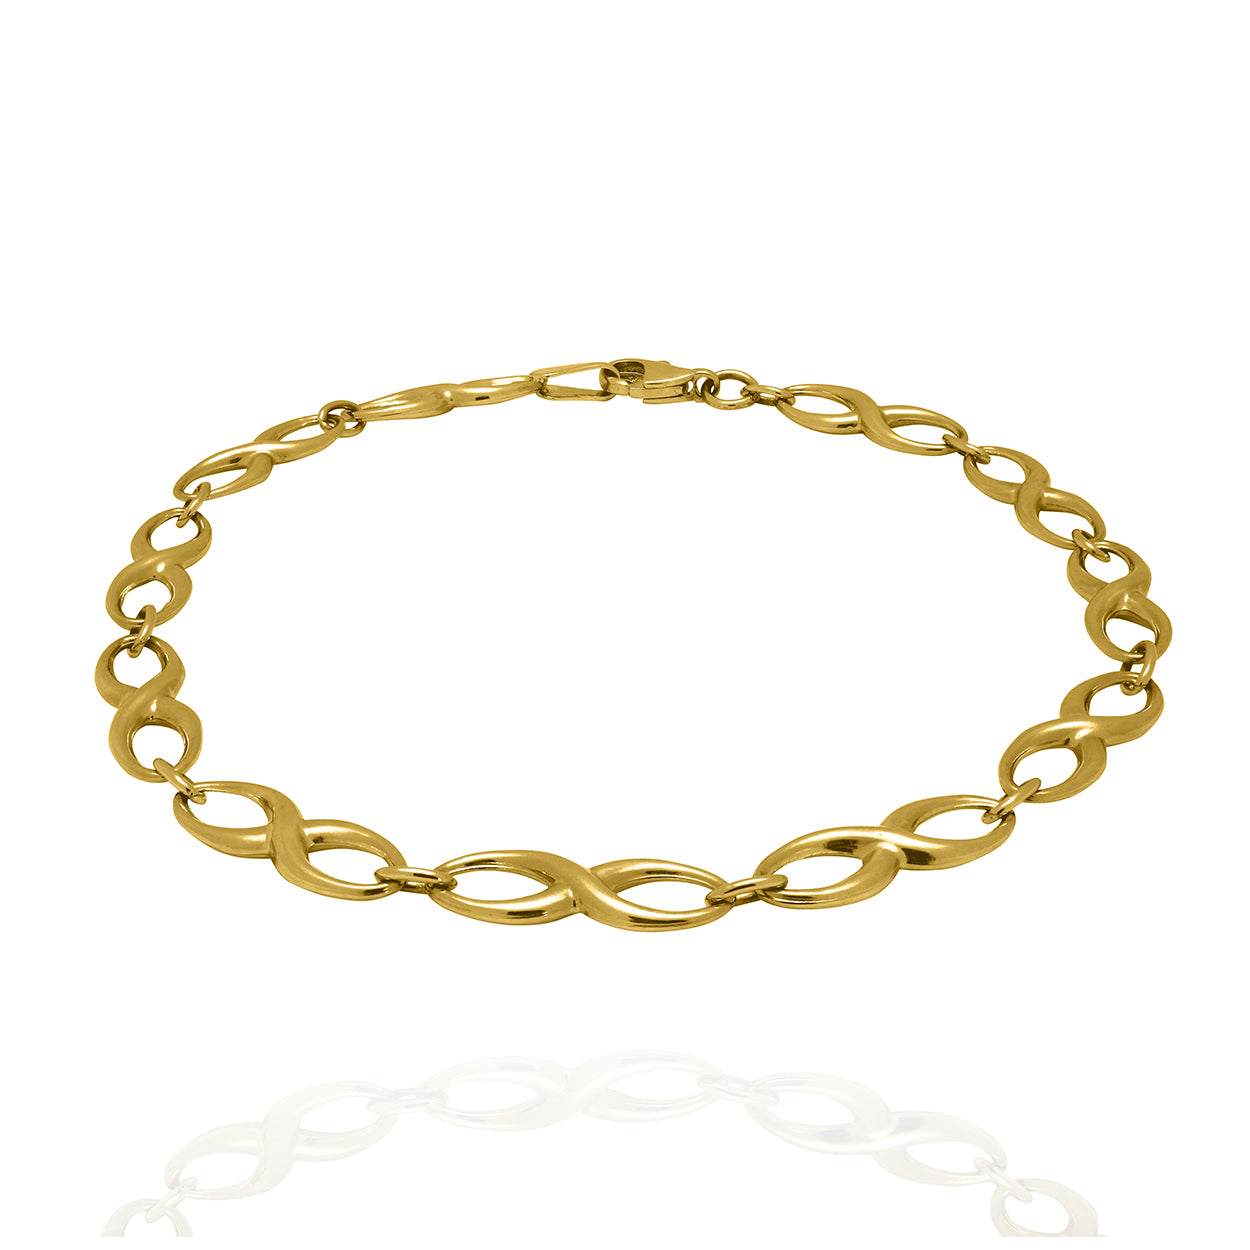 10kt Yellow Gold Bracelet with Infinity Style Links